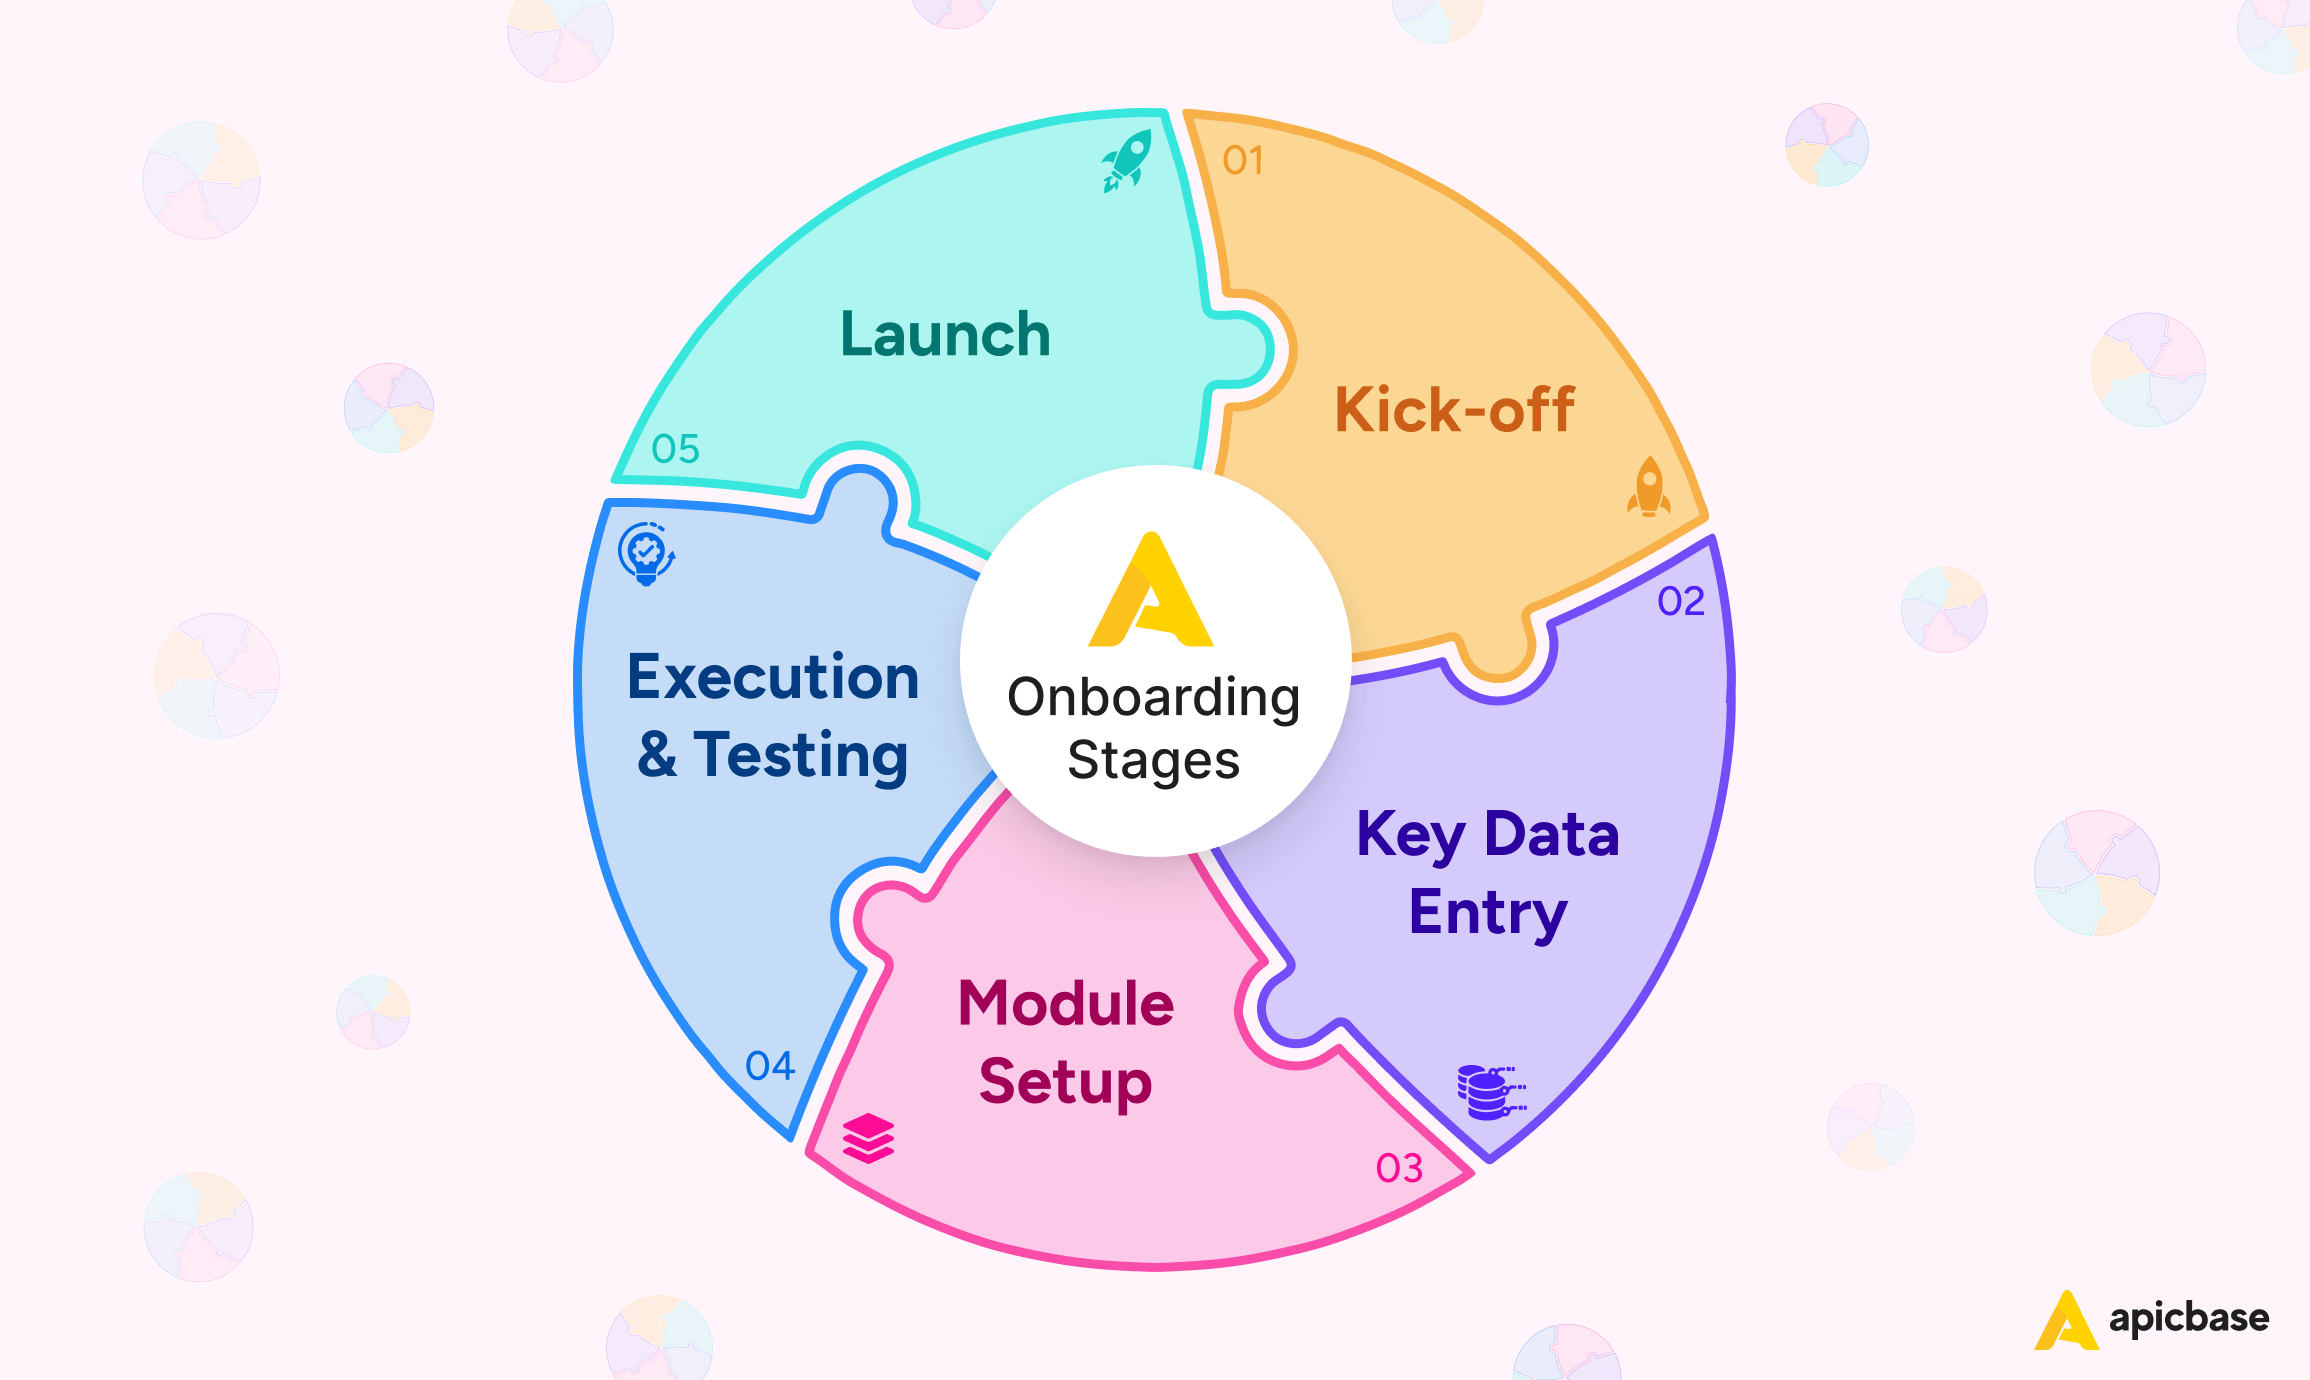 5 Apicbase Onboarding Stages